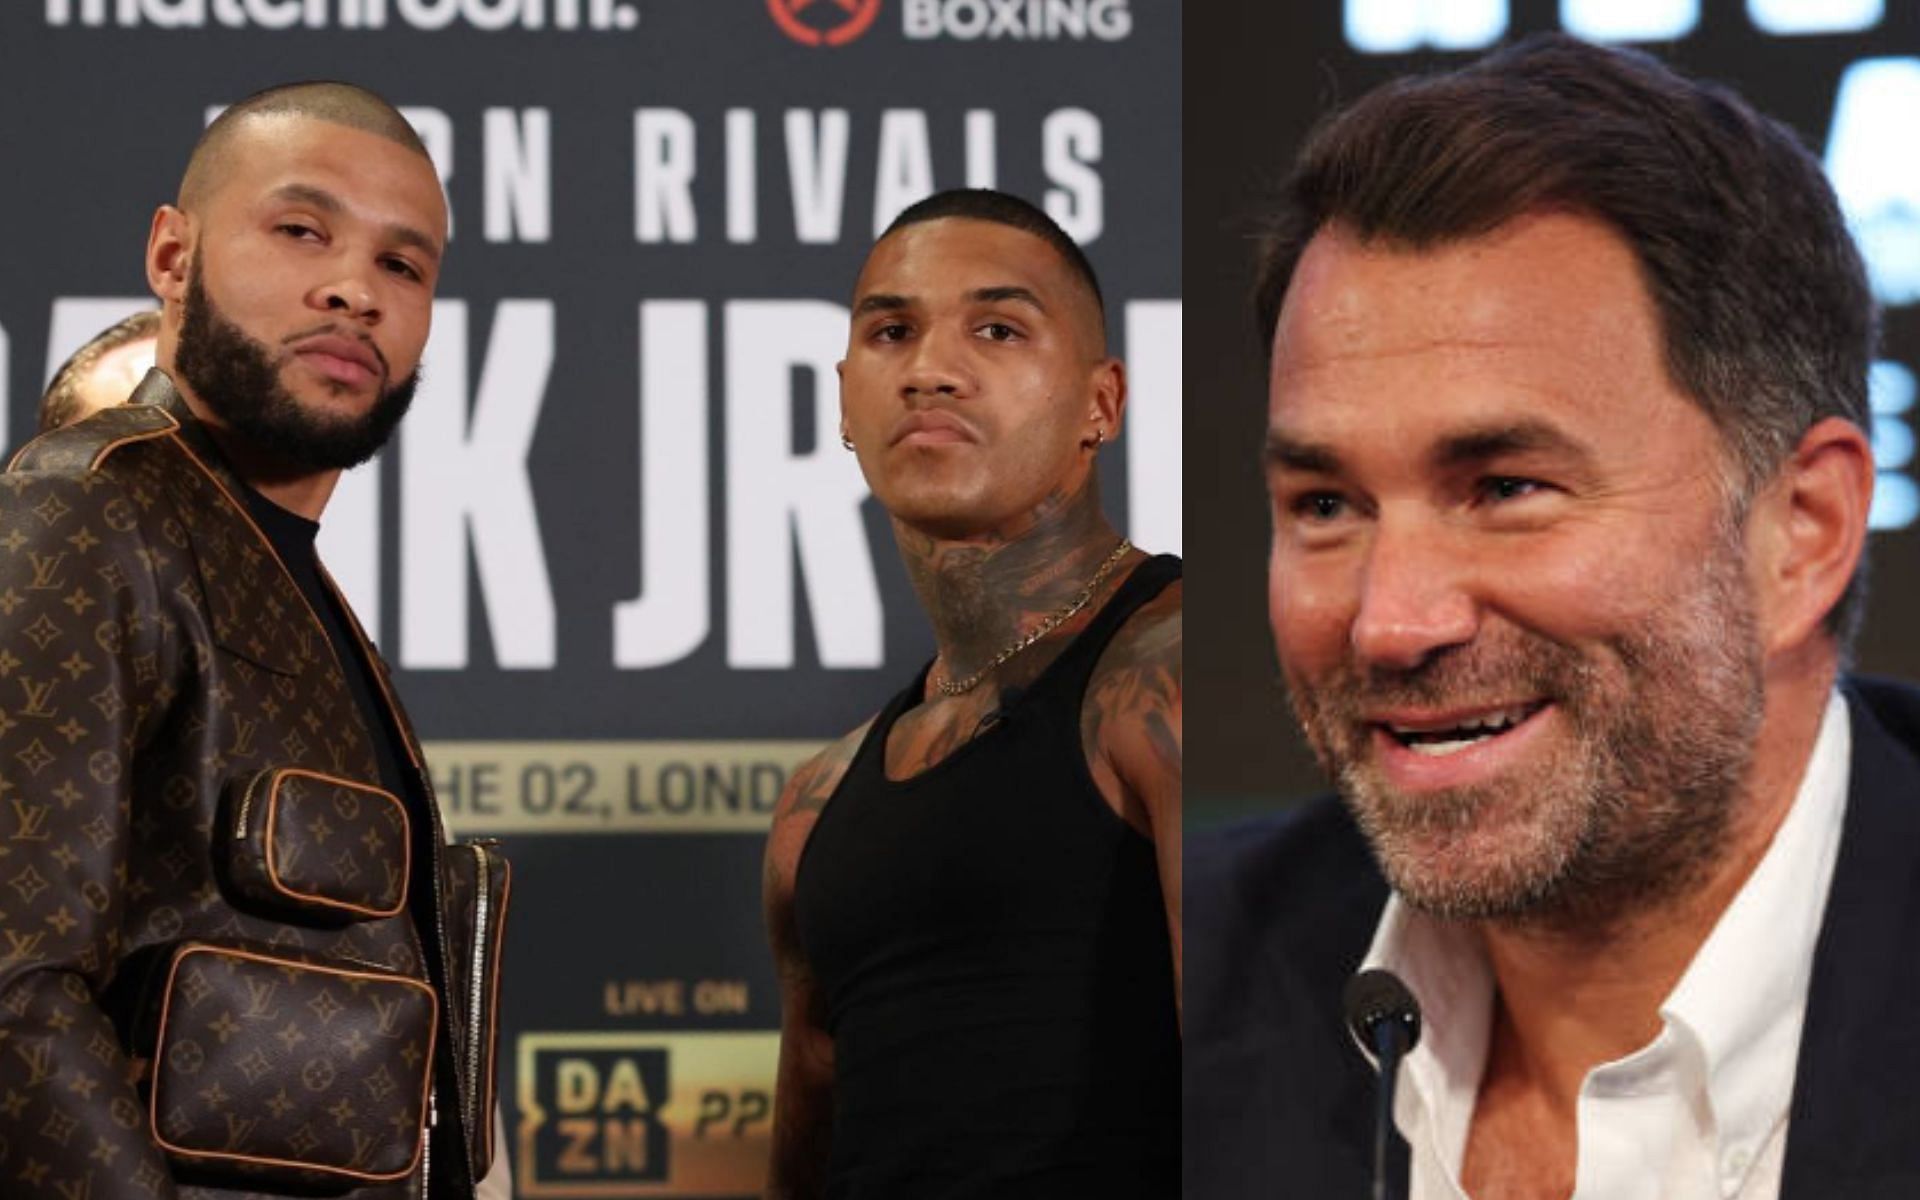 Chris Eubank Jr. vs. Conor Benn (left) and Eddie Hearn (right) [Images Courtesy: @conorbennofficial on Instagram and @GettyImages]